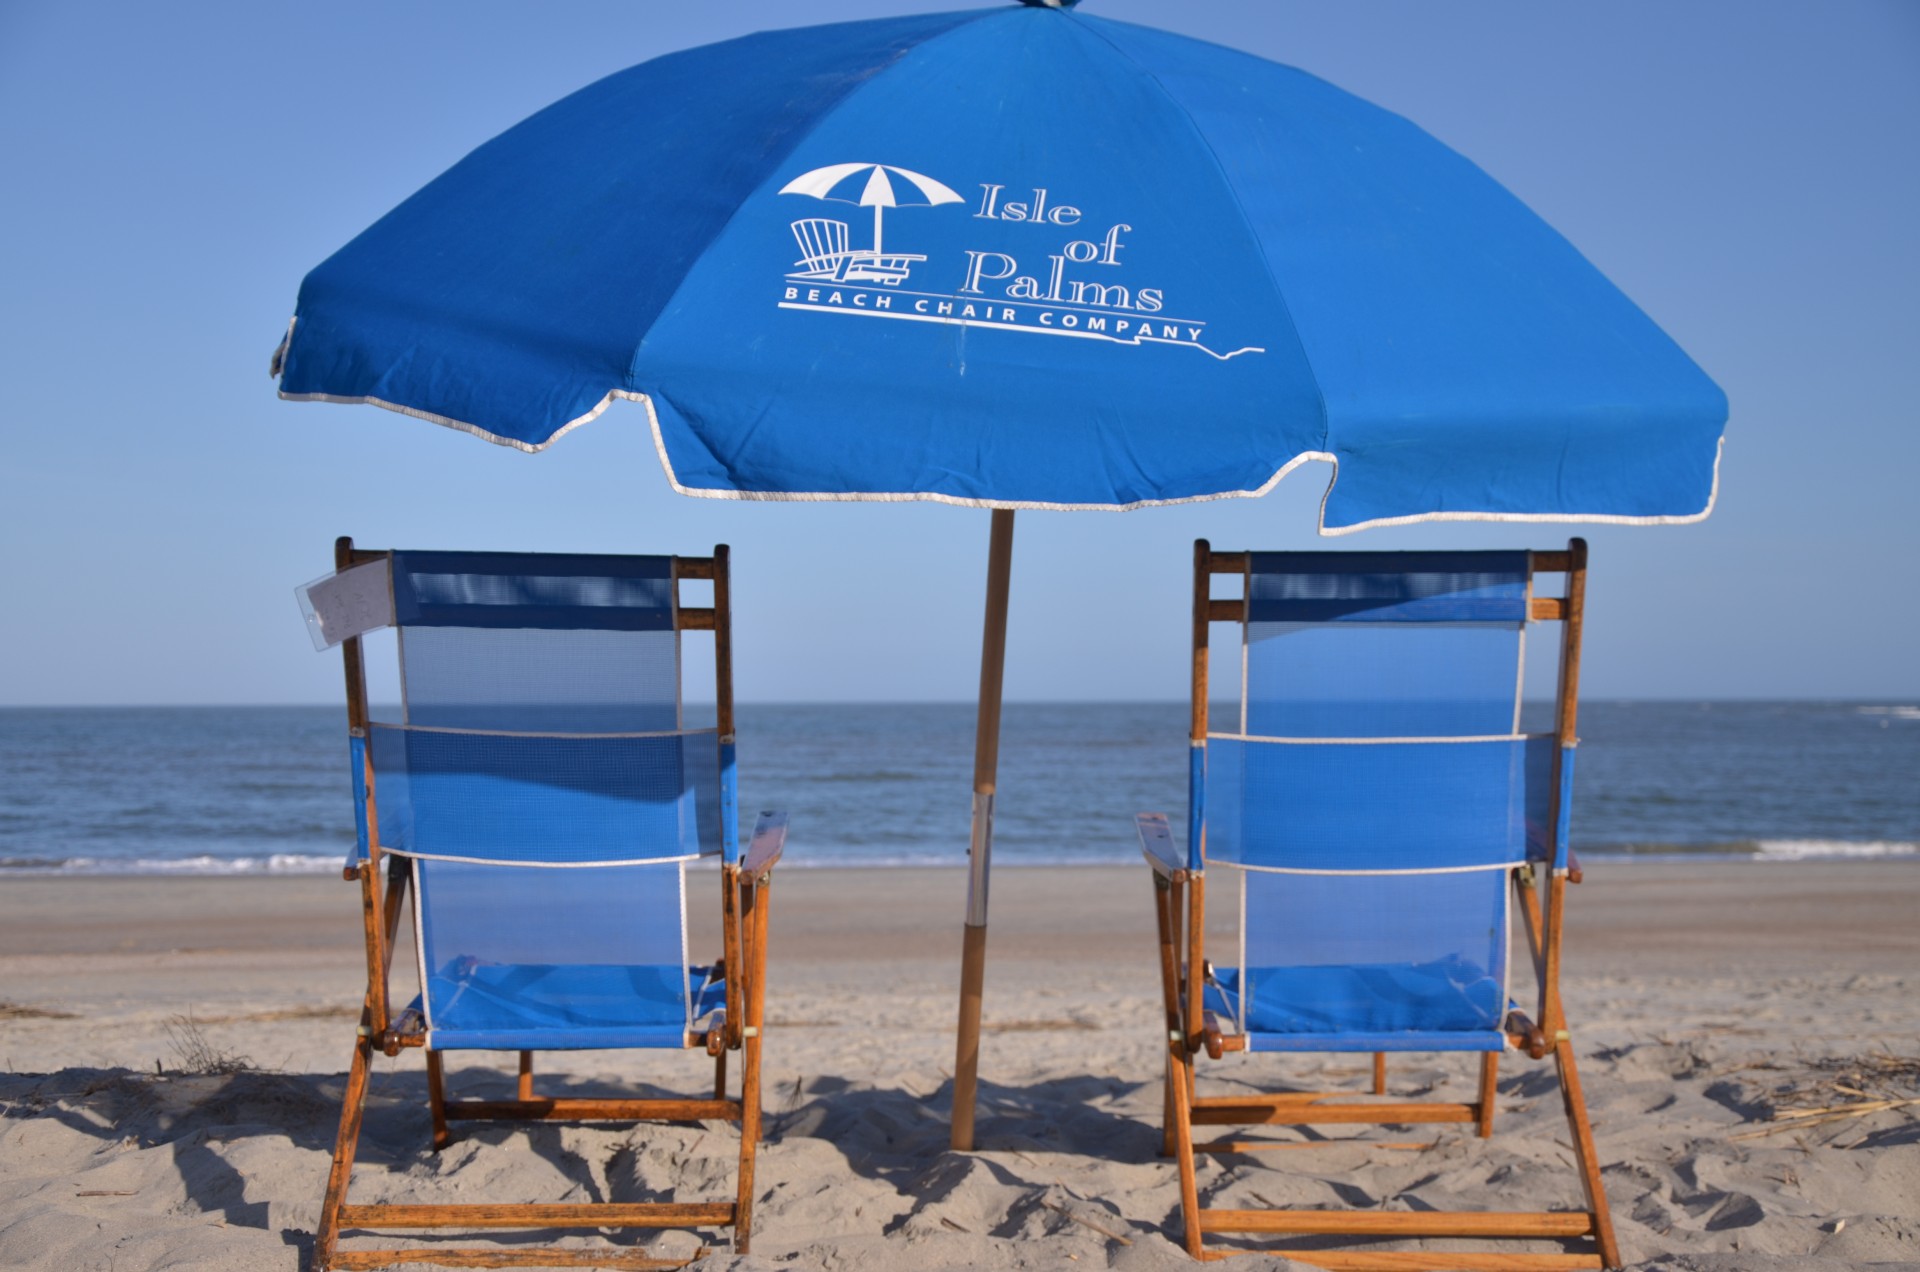 Minimalist Beach Chair And Umbrella Rentals Isle Of Palms Sc for Small Space